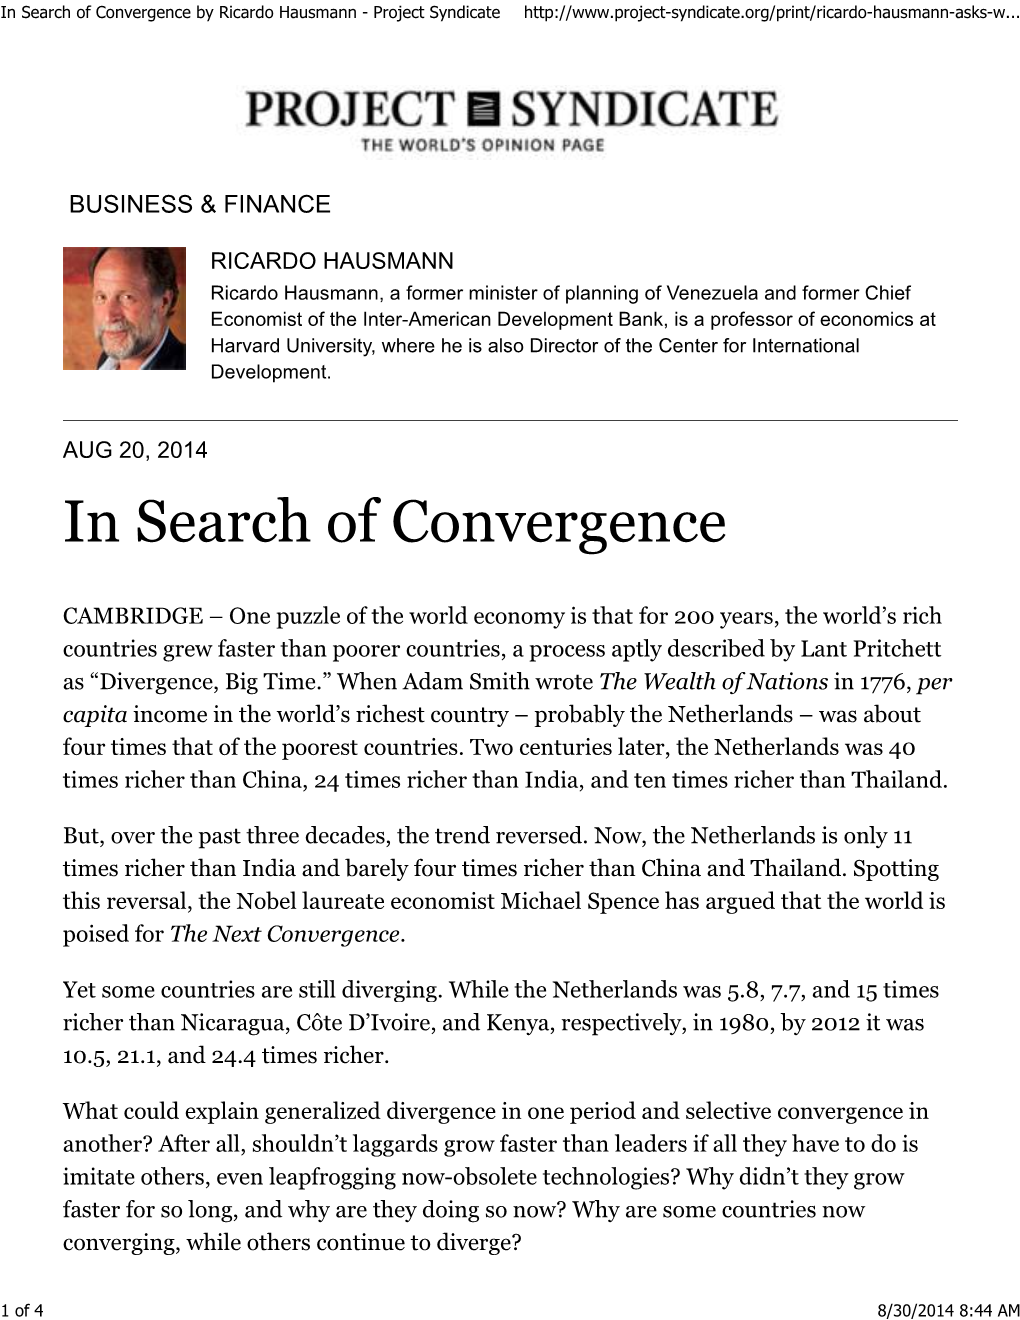 In Search of Convergence by Ricardo Hausmann - Project Syndicate